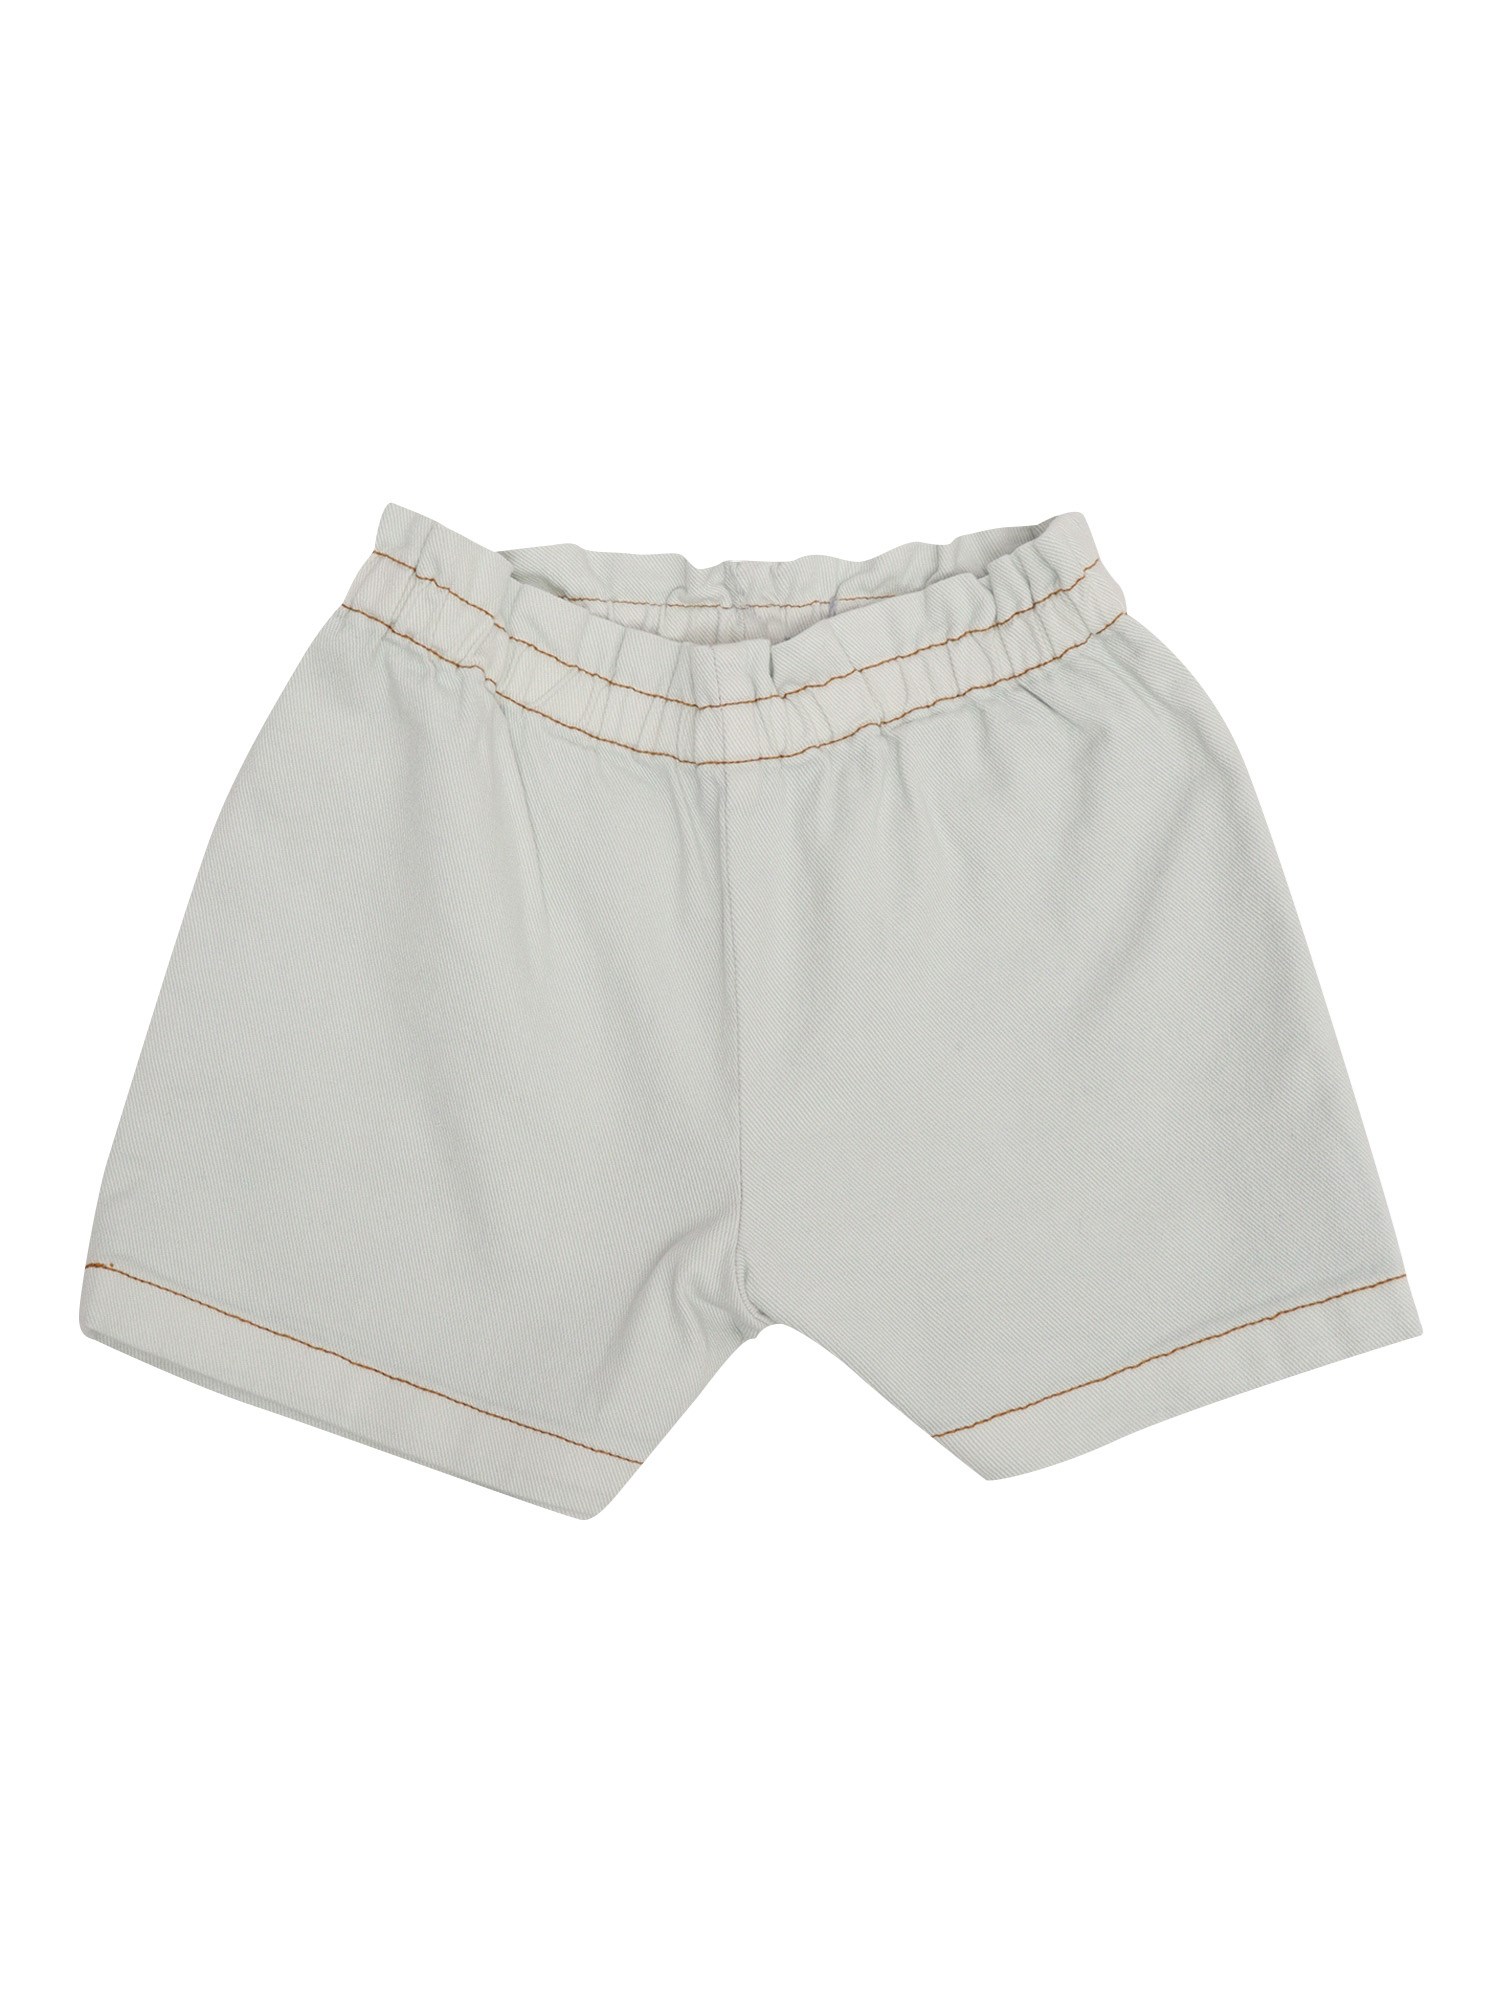 Bonpoint Cream Colored Shorts In White